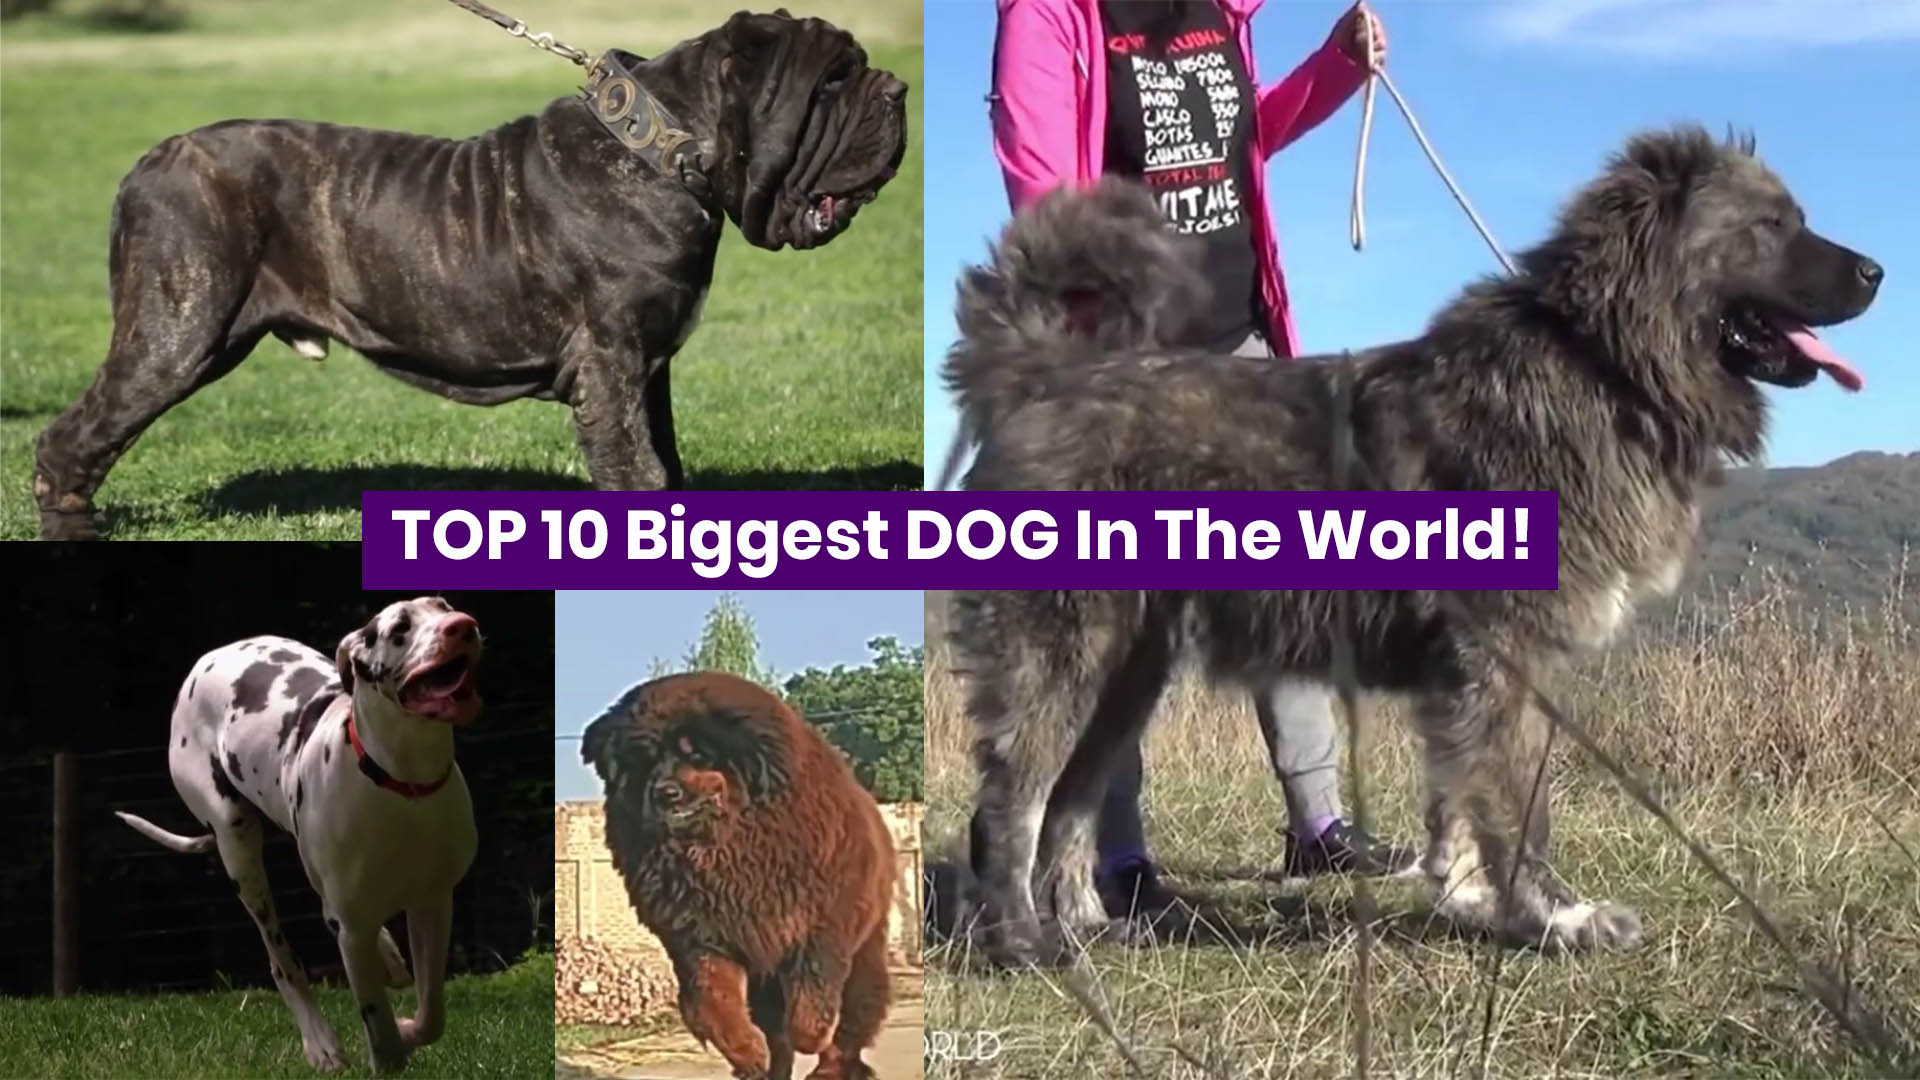 Top 10 Biggest Dog In The World